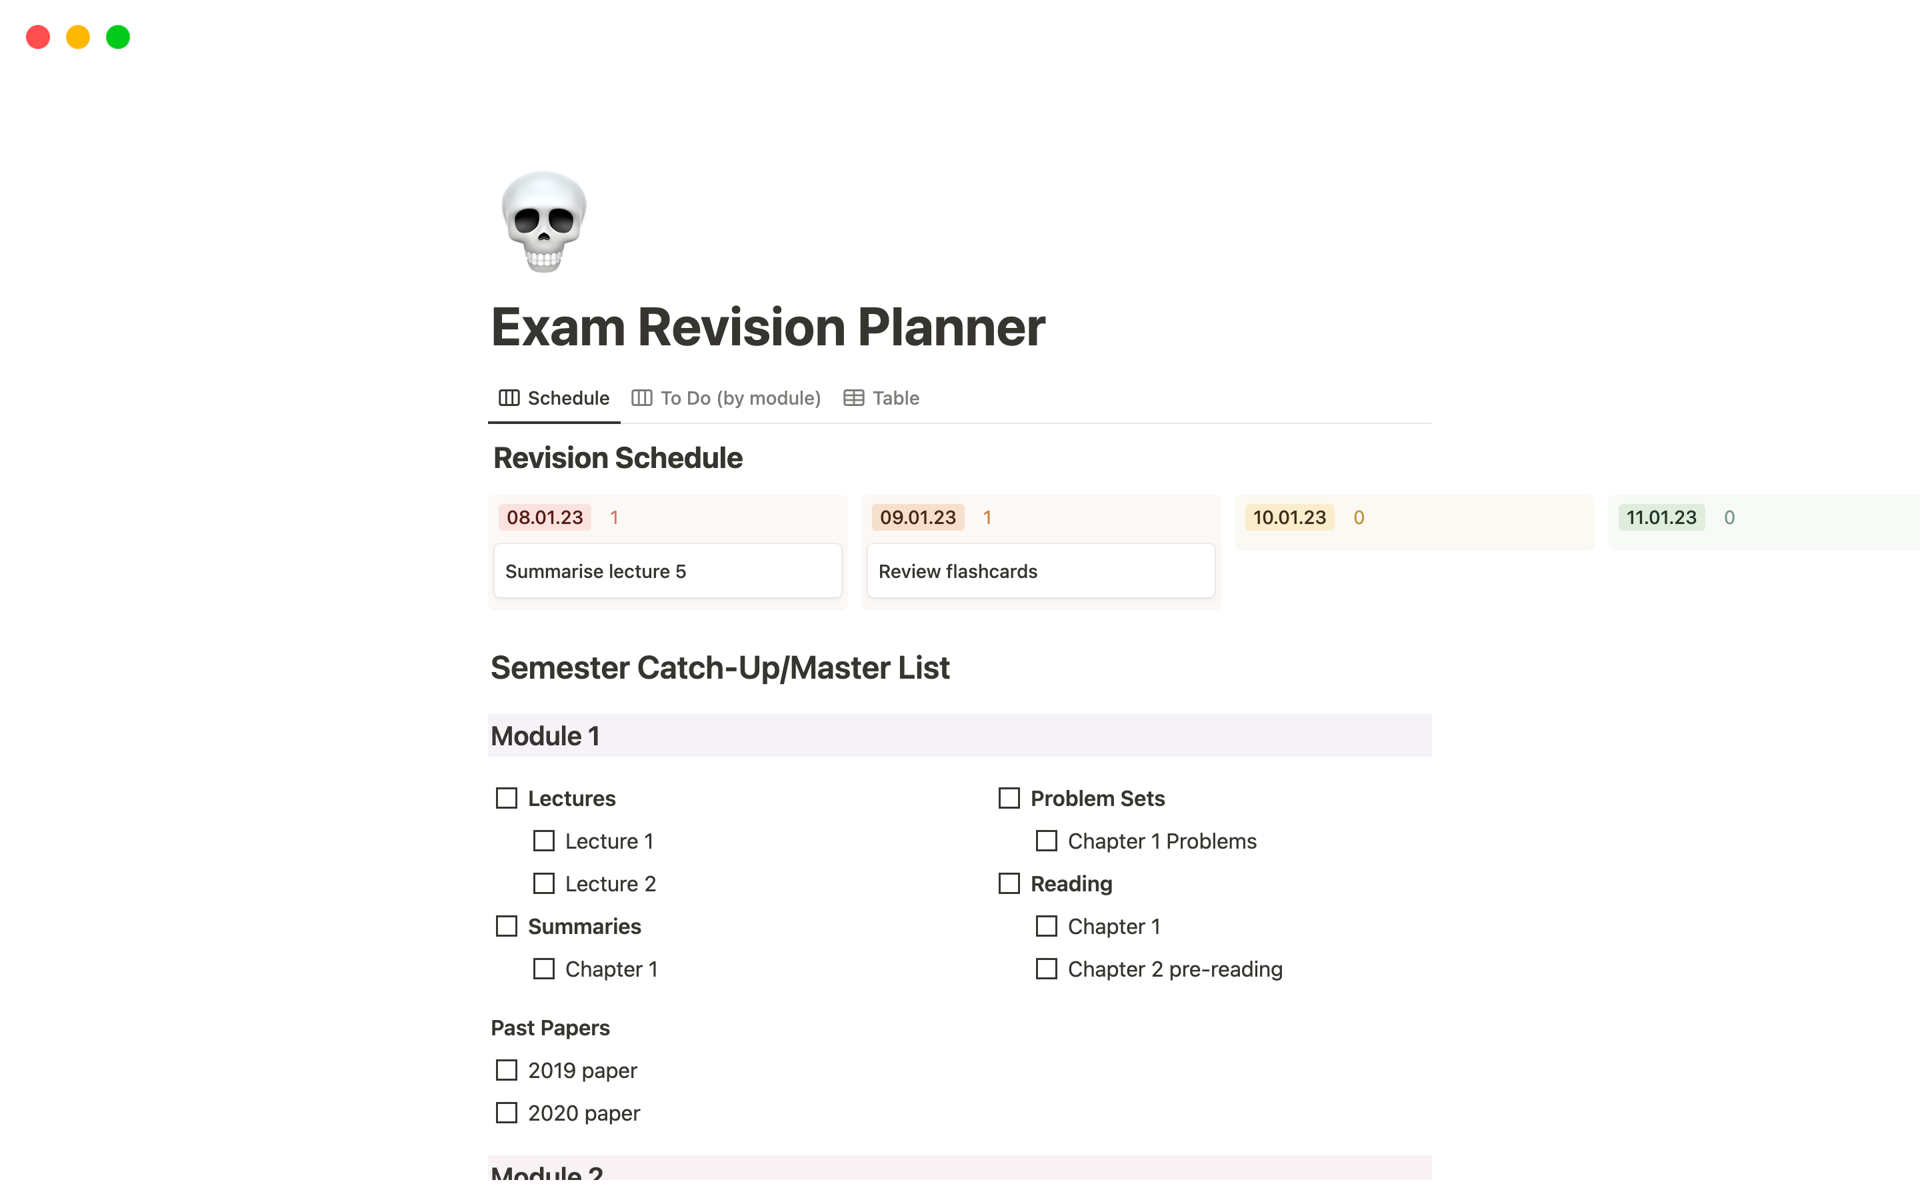 Couldn't find any exam revision templates that suited my needs so I made one!